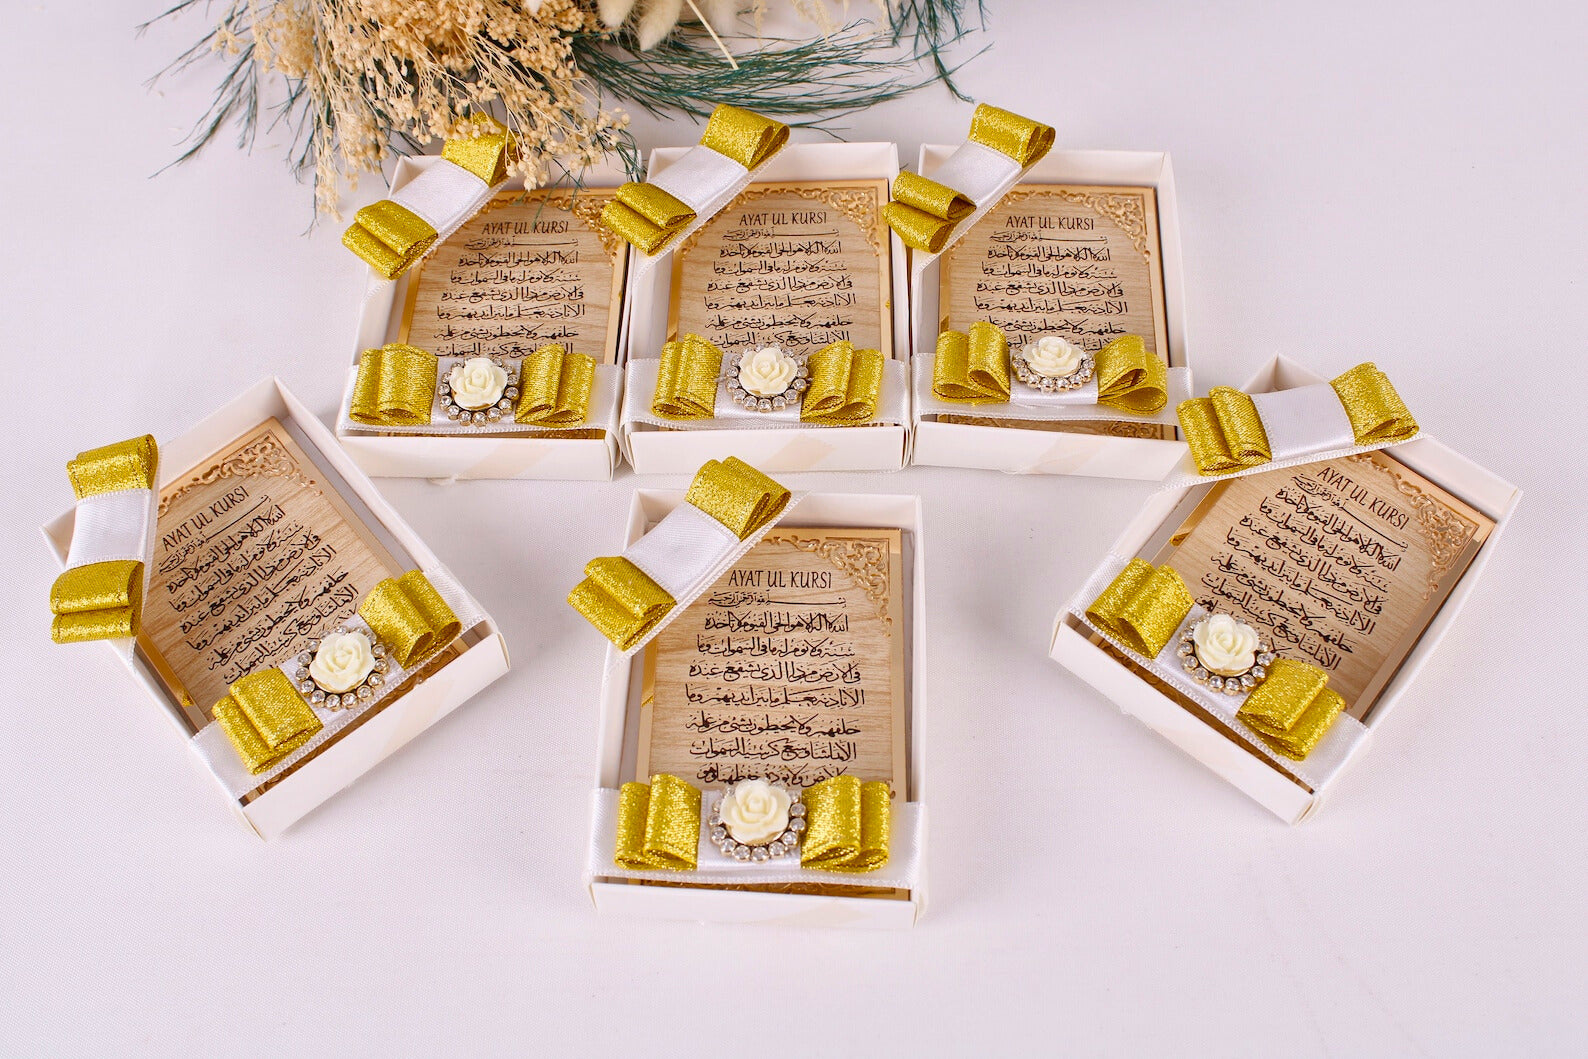 Personalized Wedding Favor Ayatul Kursi on Stand Gold Frame Brown Wood - Islamic Elite Favors is a handmade gift shop offering a wide variety of unique and personalized gifts for all occasions. Whether you're looking for the perfect Ramadan, Eid, Hajj, wedding gift or something special for a birthday, baby shower or anniversary, we have something for everyone. High quality, made with love.